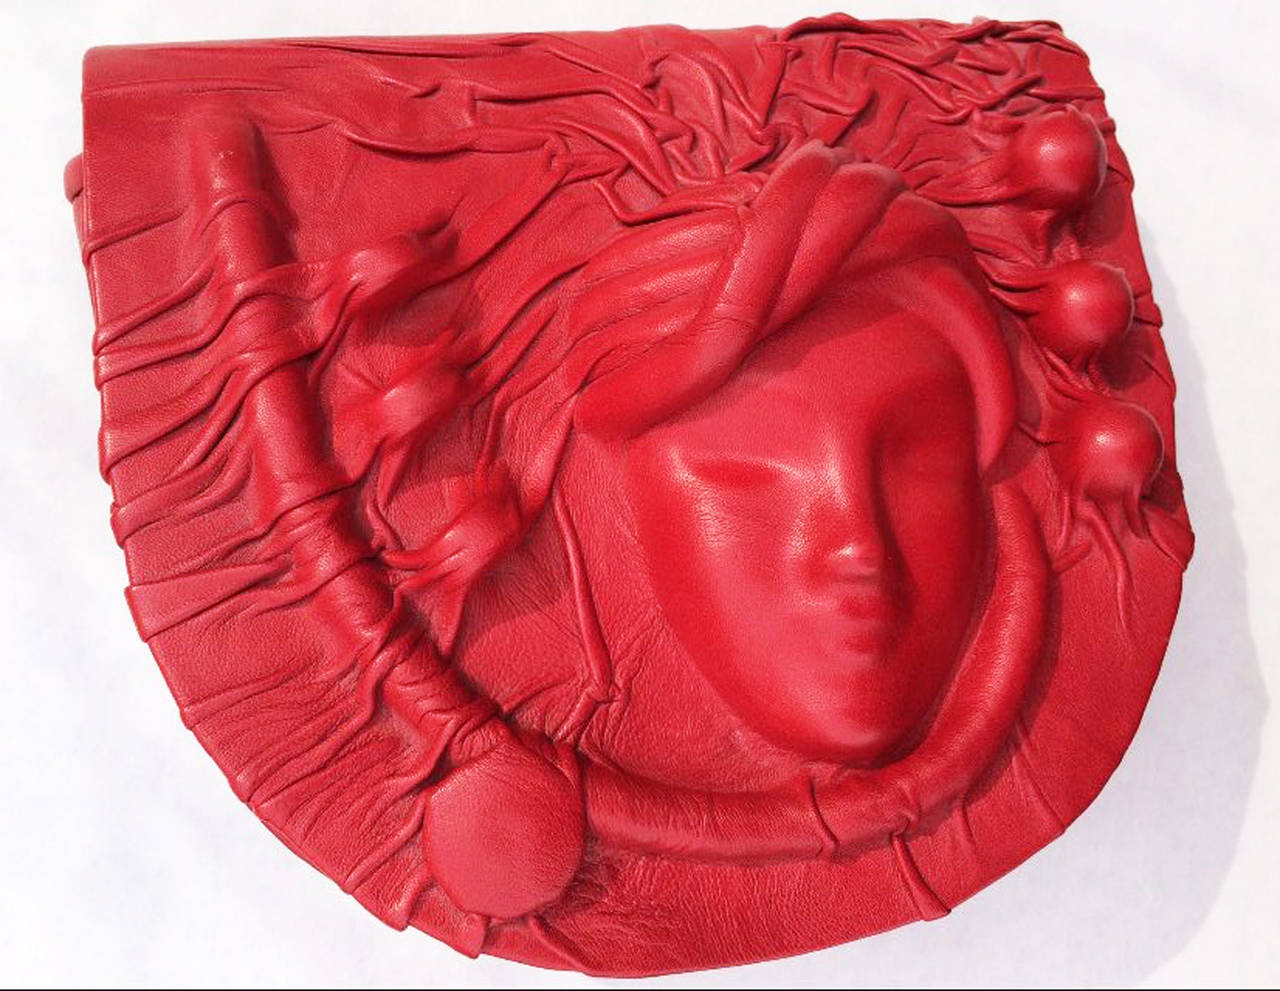 A fine vintage sculpted leather clutch handbag. Molded and sculpted vibrant red leather item features a fold-over magnetic flap closure and drop matching 37